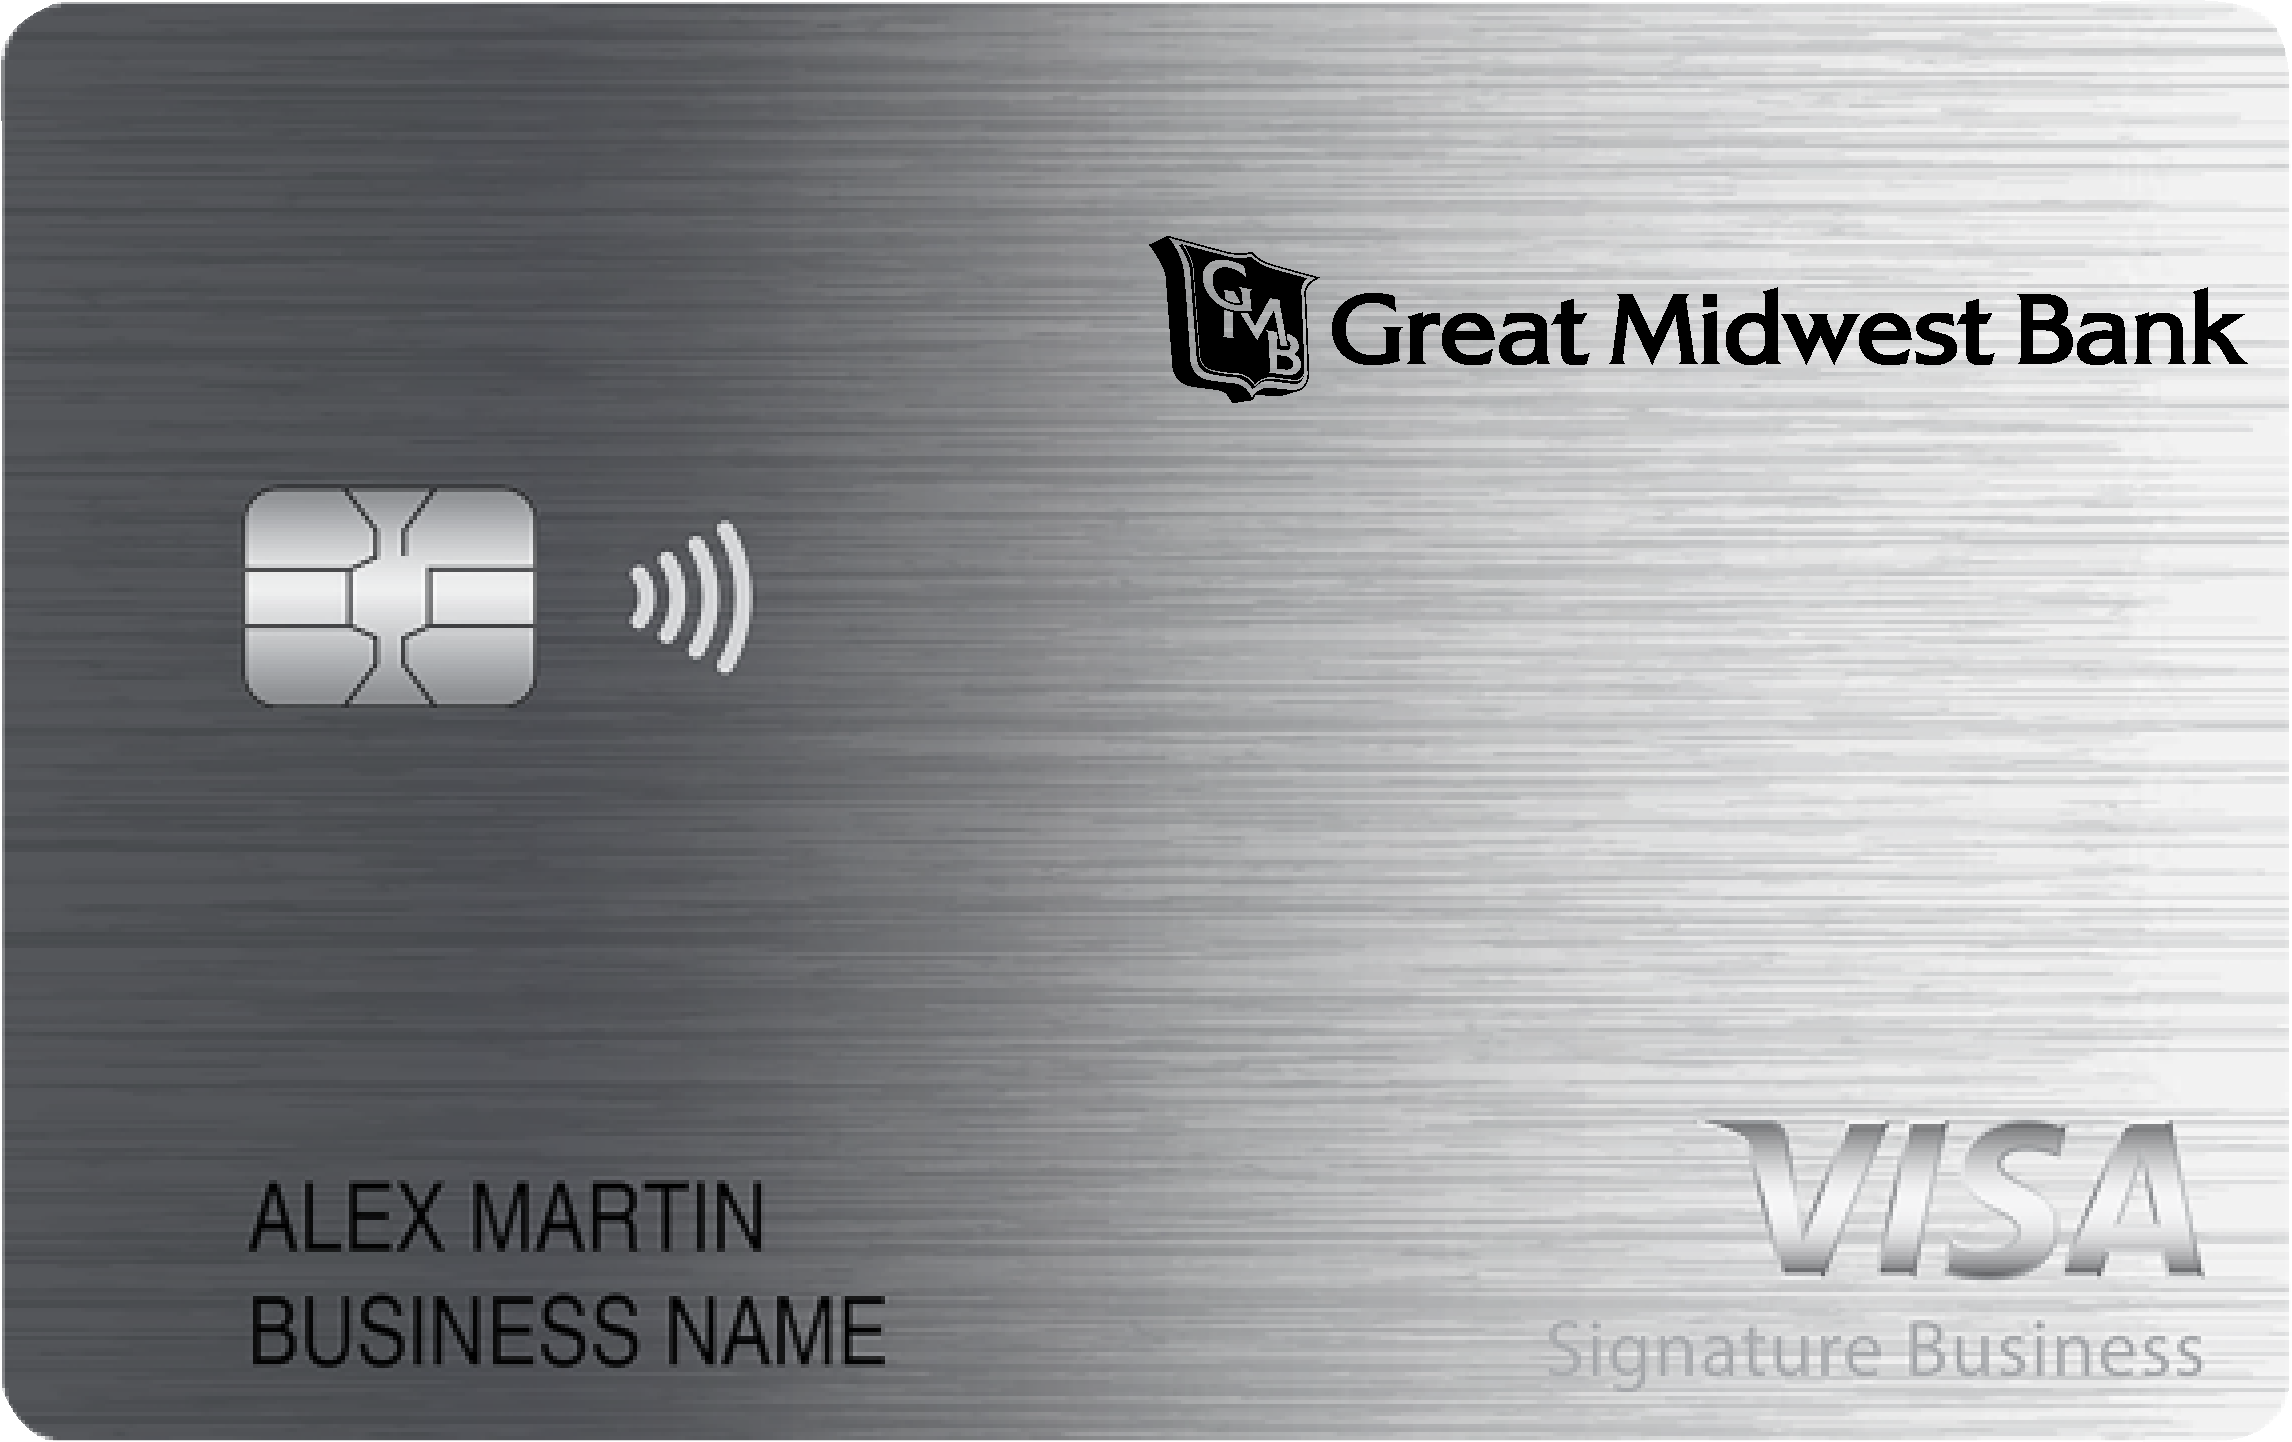 Great Midwest Bank Smart Business Rewards Card